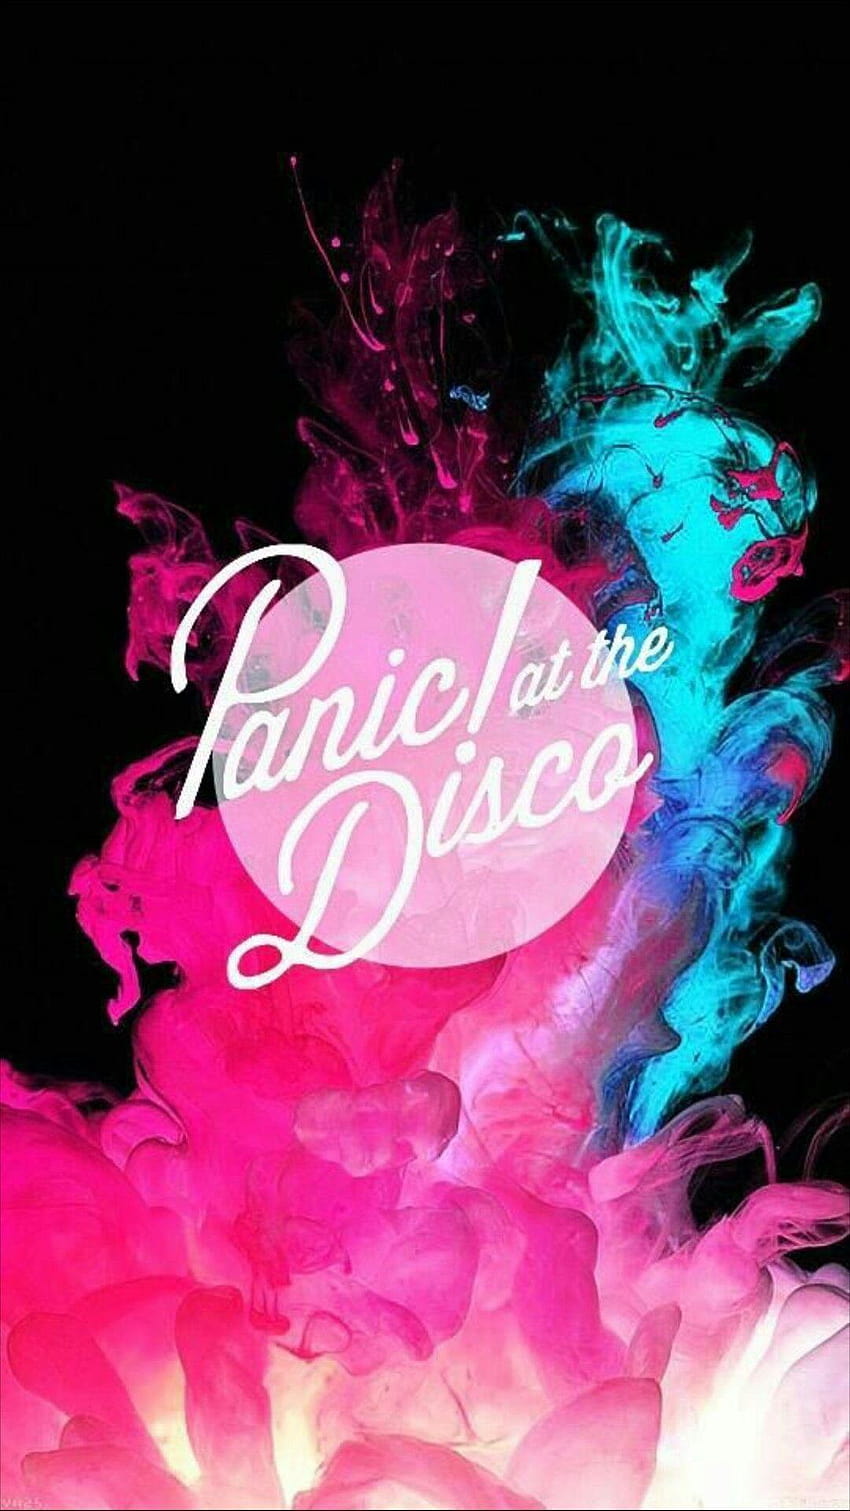 Panic! At The Disco neon blue & pink smoke phone backgrounds, emo bands HD phone wallpaper